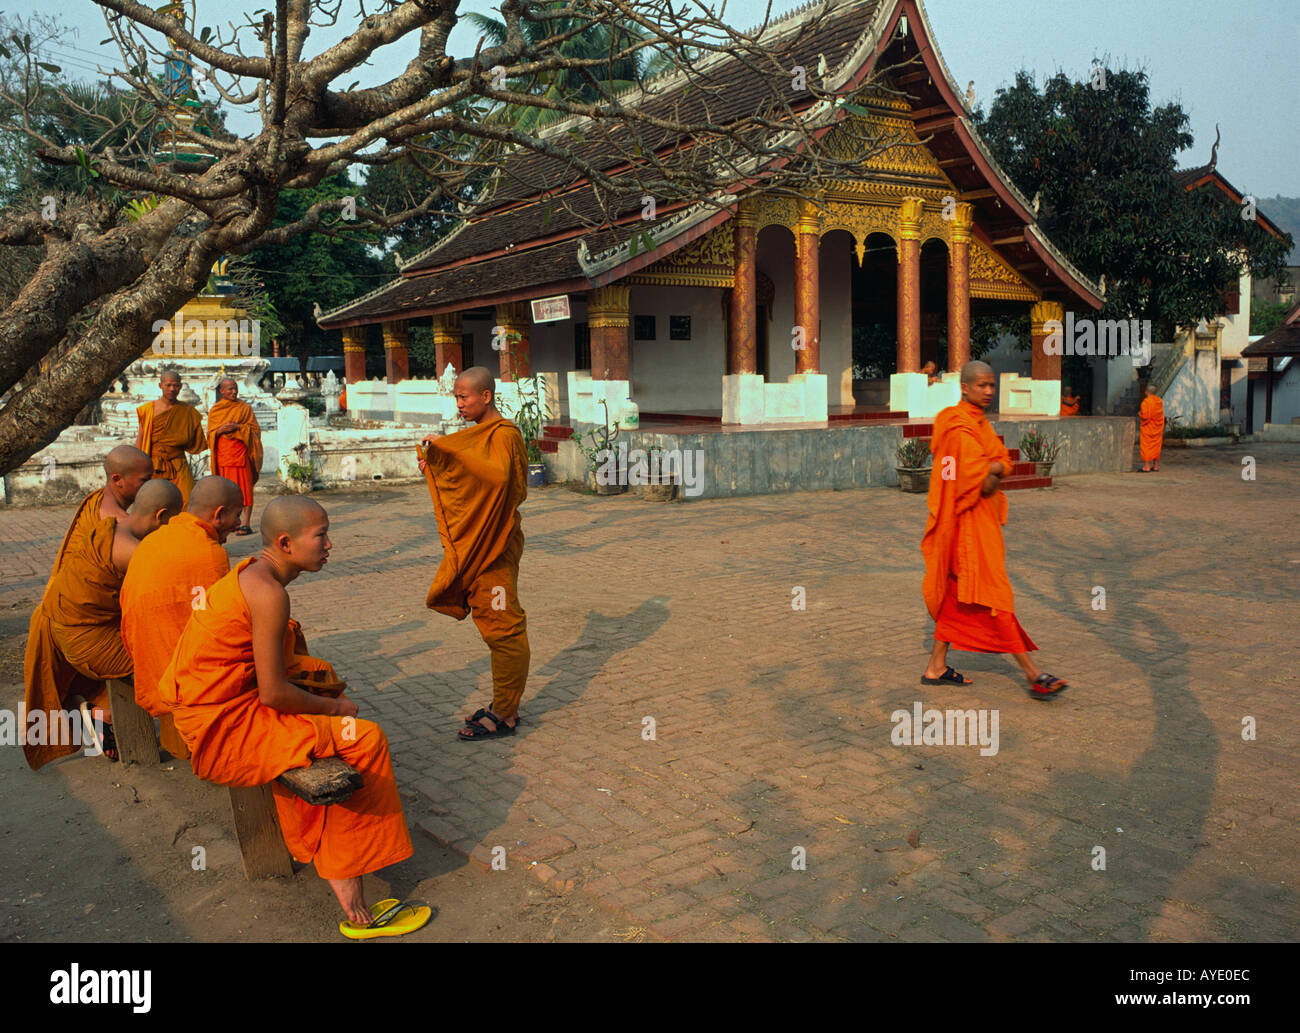 Laos Luang Prabang temple Wat Saen young monks seating in courtyard with temple in bkgd Stock Photo